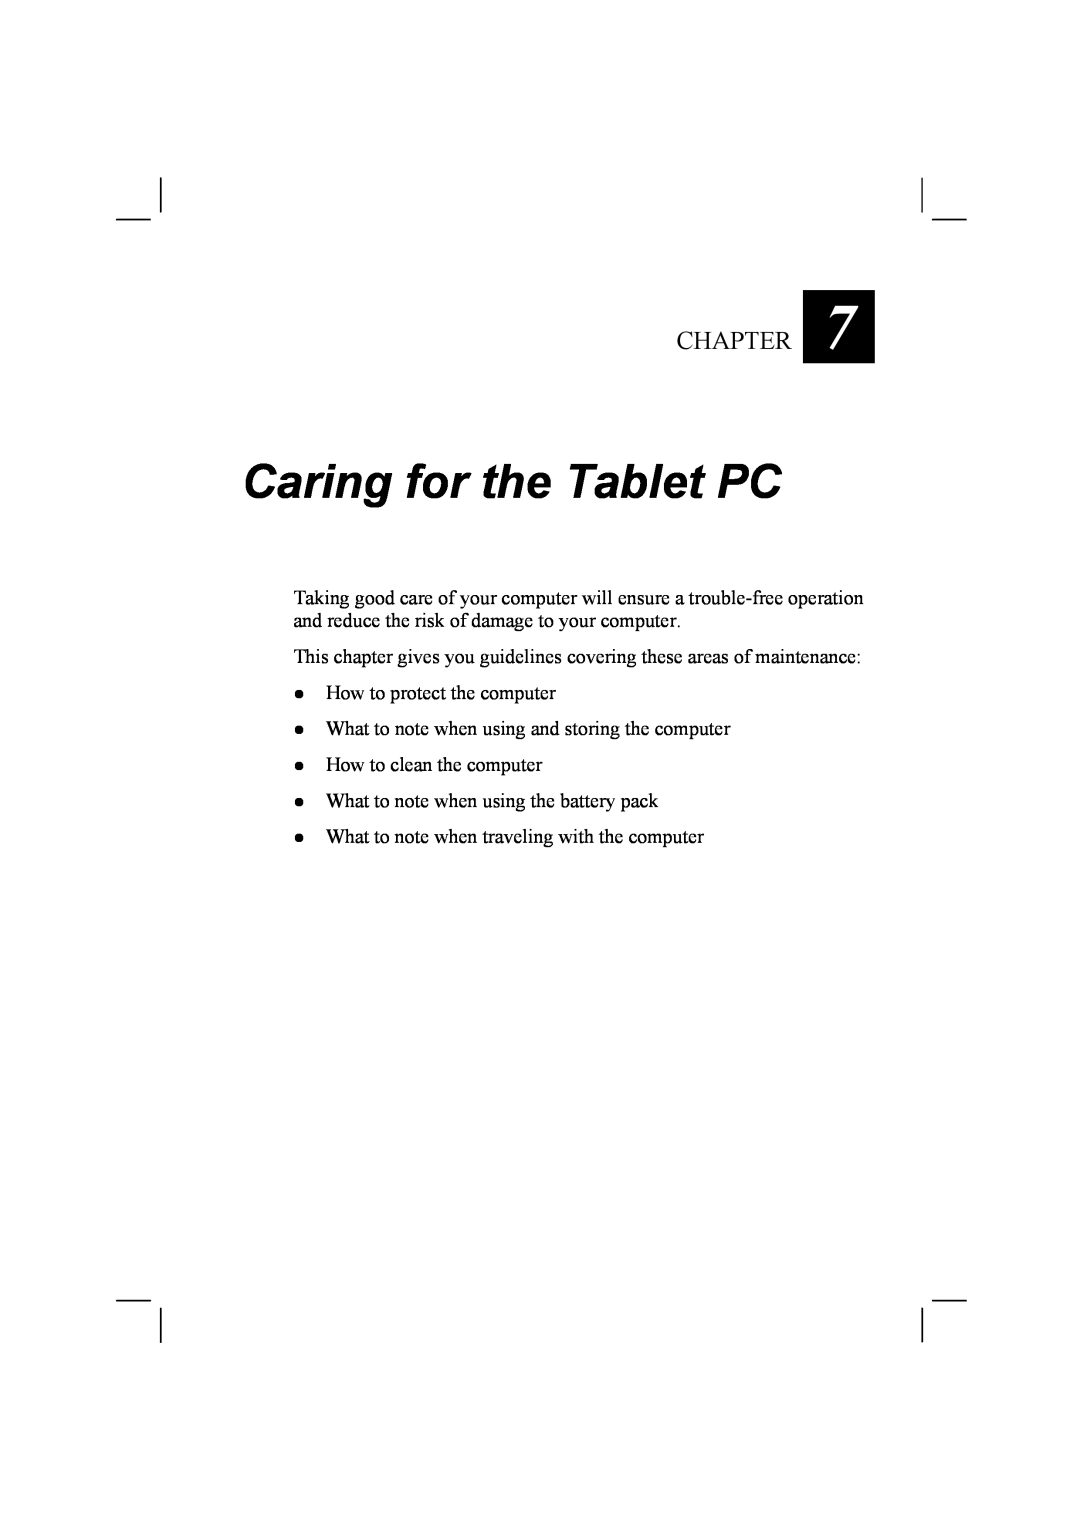 TAG 10 manual Caring for the Tablet PC, Chapter 